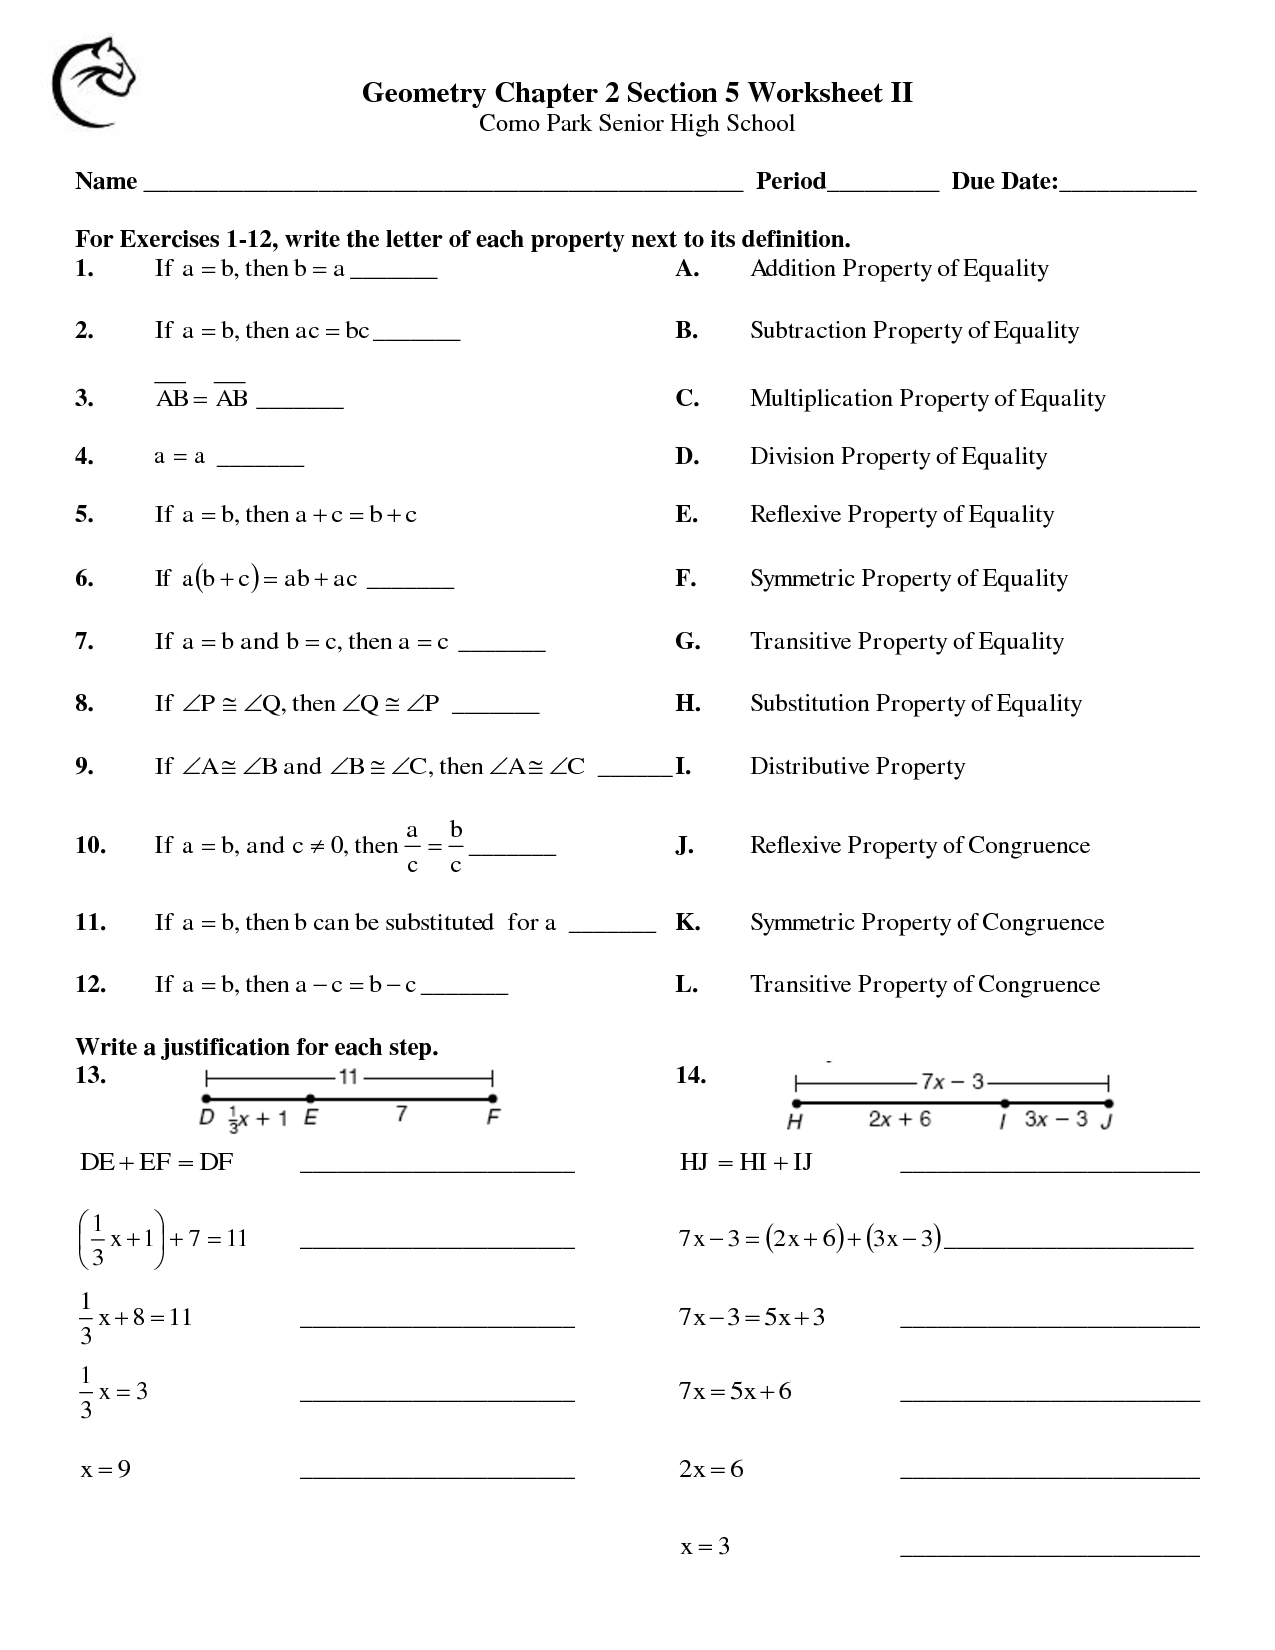 Properties Of Equality Worksheet With Answers Pdf